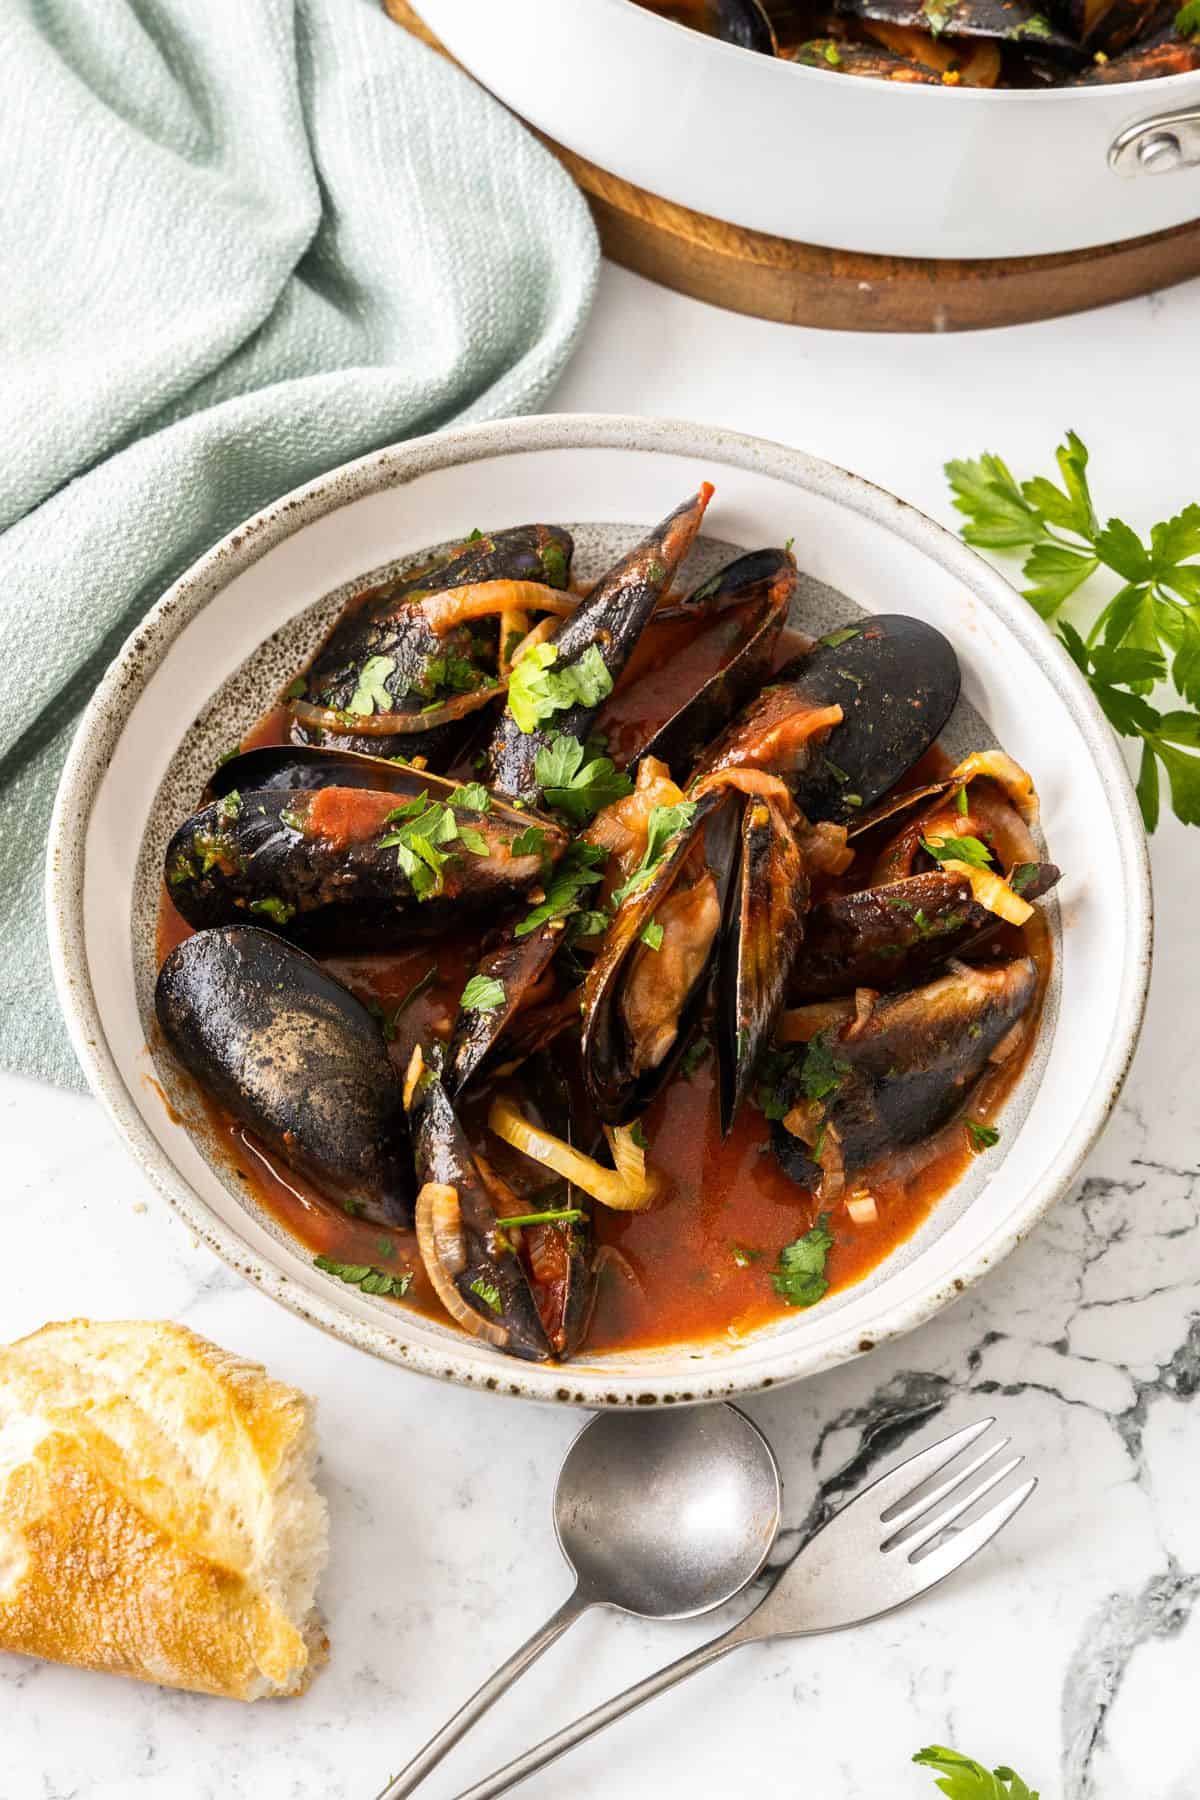 A serving of Mussels in Tomato Sauce, with some bread and cutlery sitting next to the bowl.